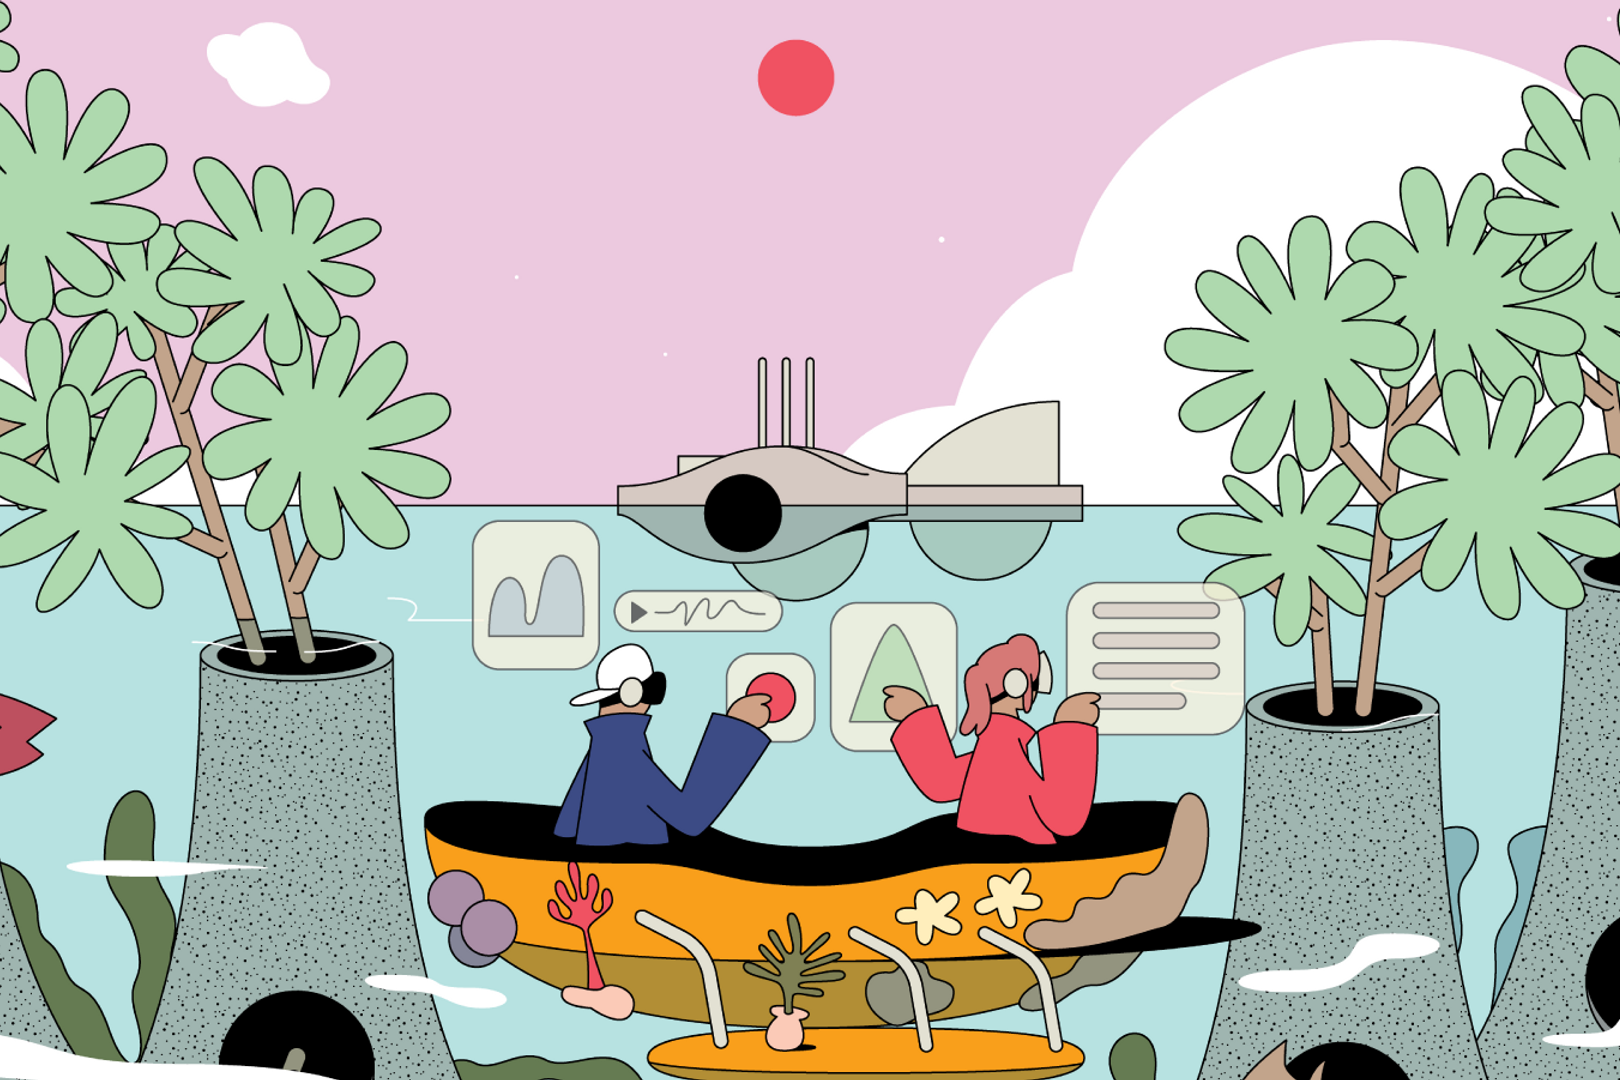 An illustration filled with scenes from the Collission Anthology including a boat with two people wearing AR headsets and trees sprouting out of concrete chimneys.